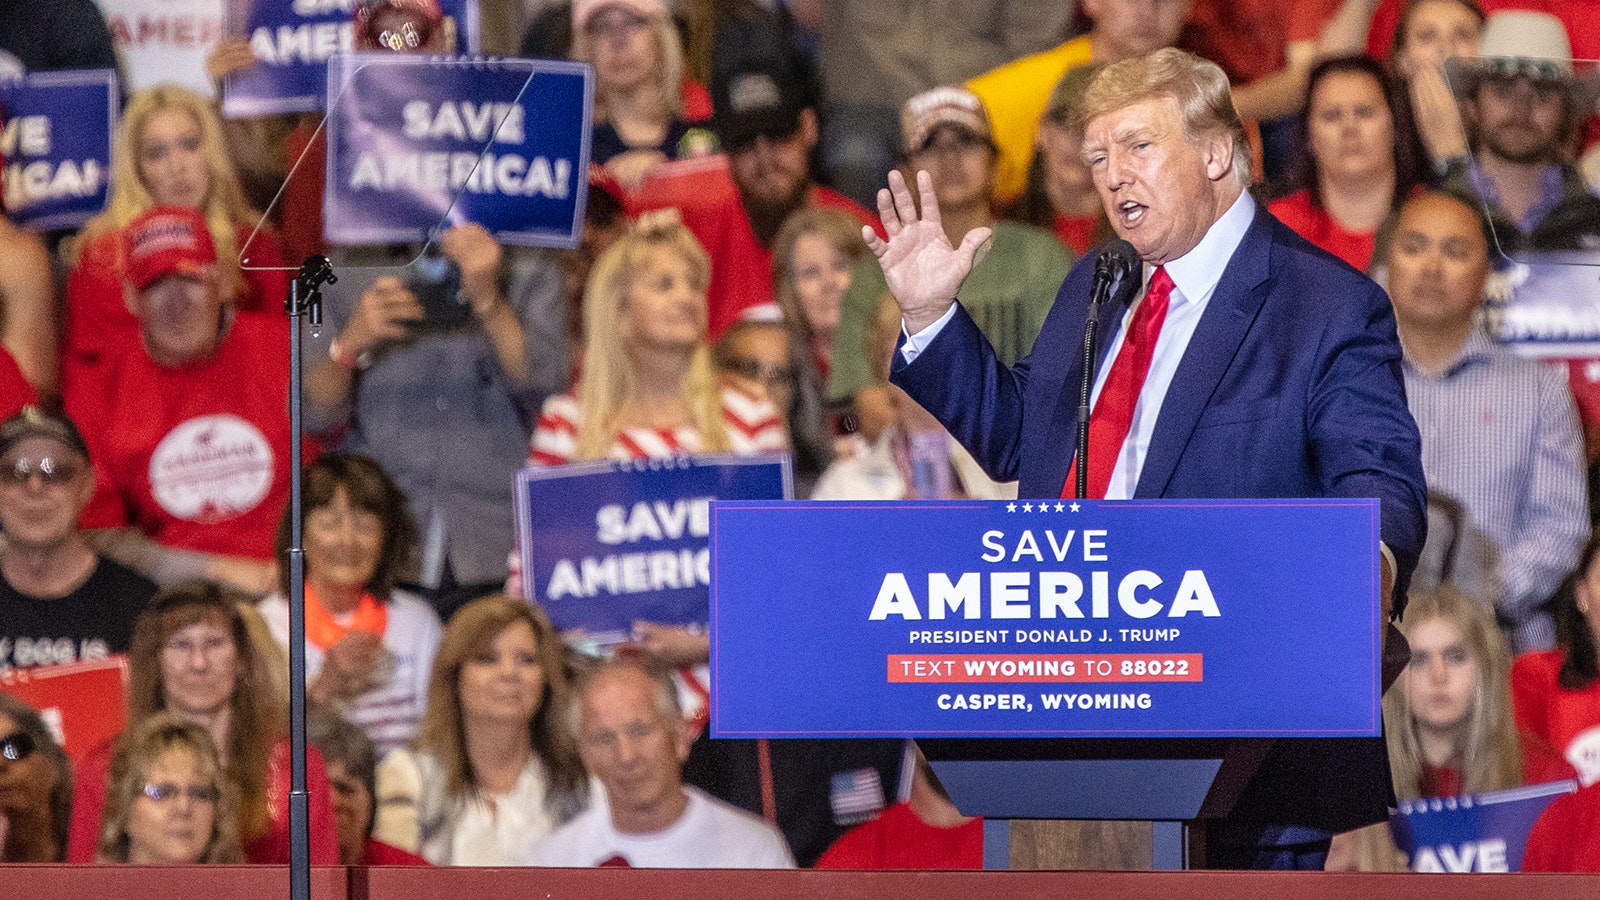 Former President Donald Trump at a Save America rally in Casper, Wyoming, in May 2022.